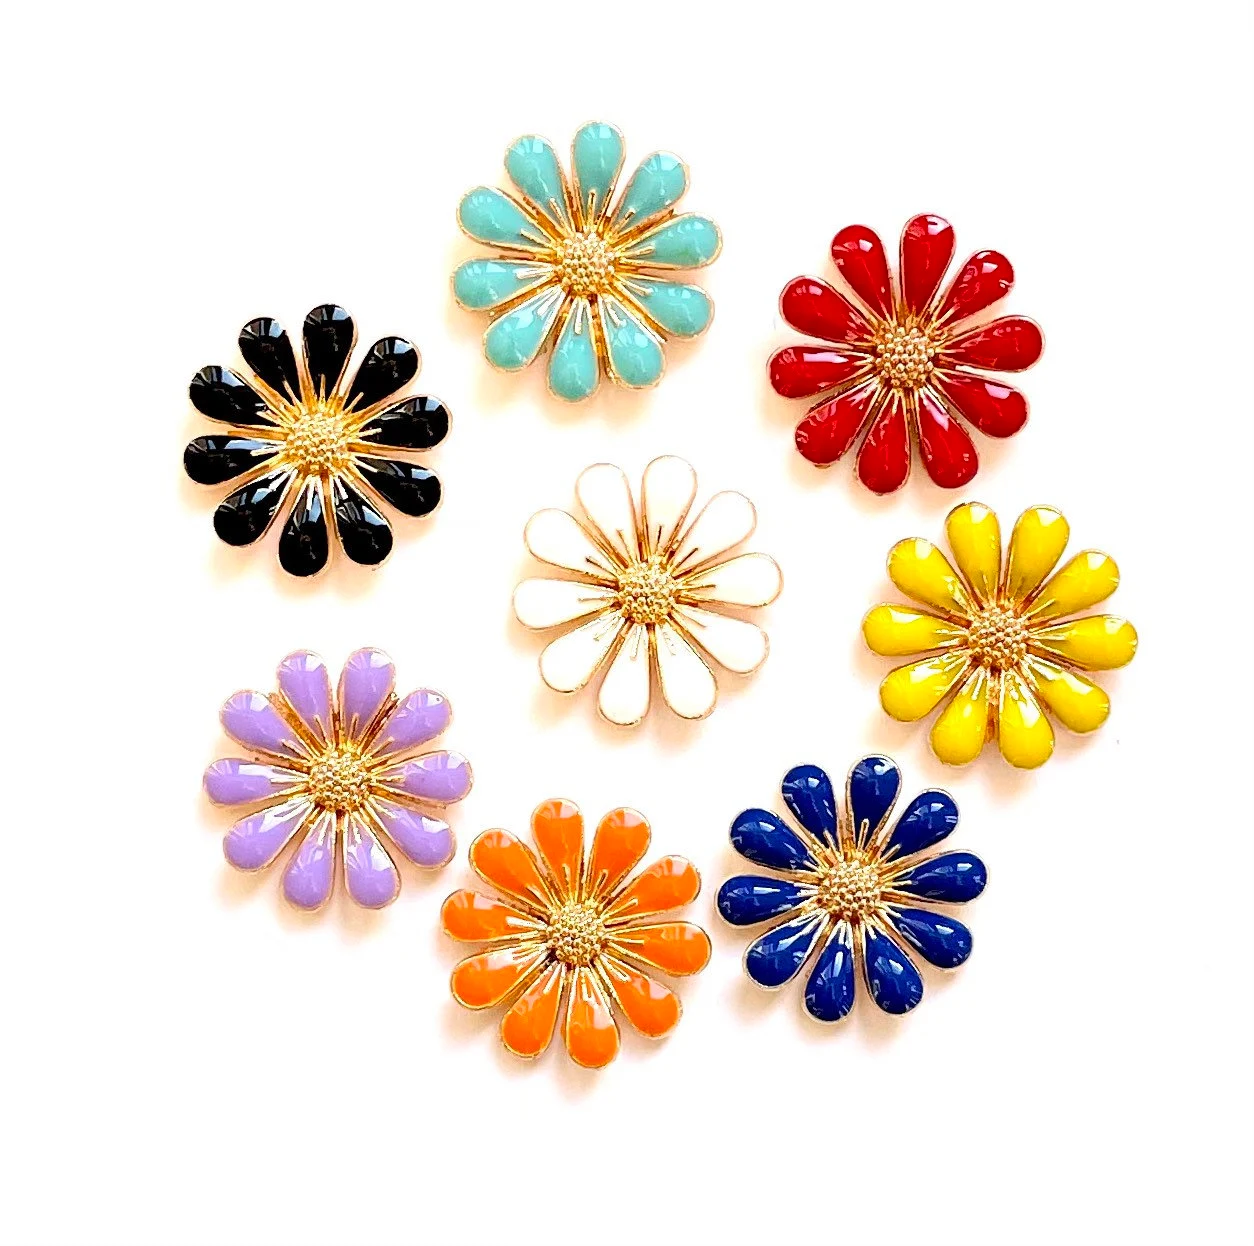 Flower cabochons